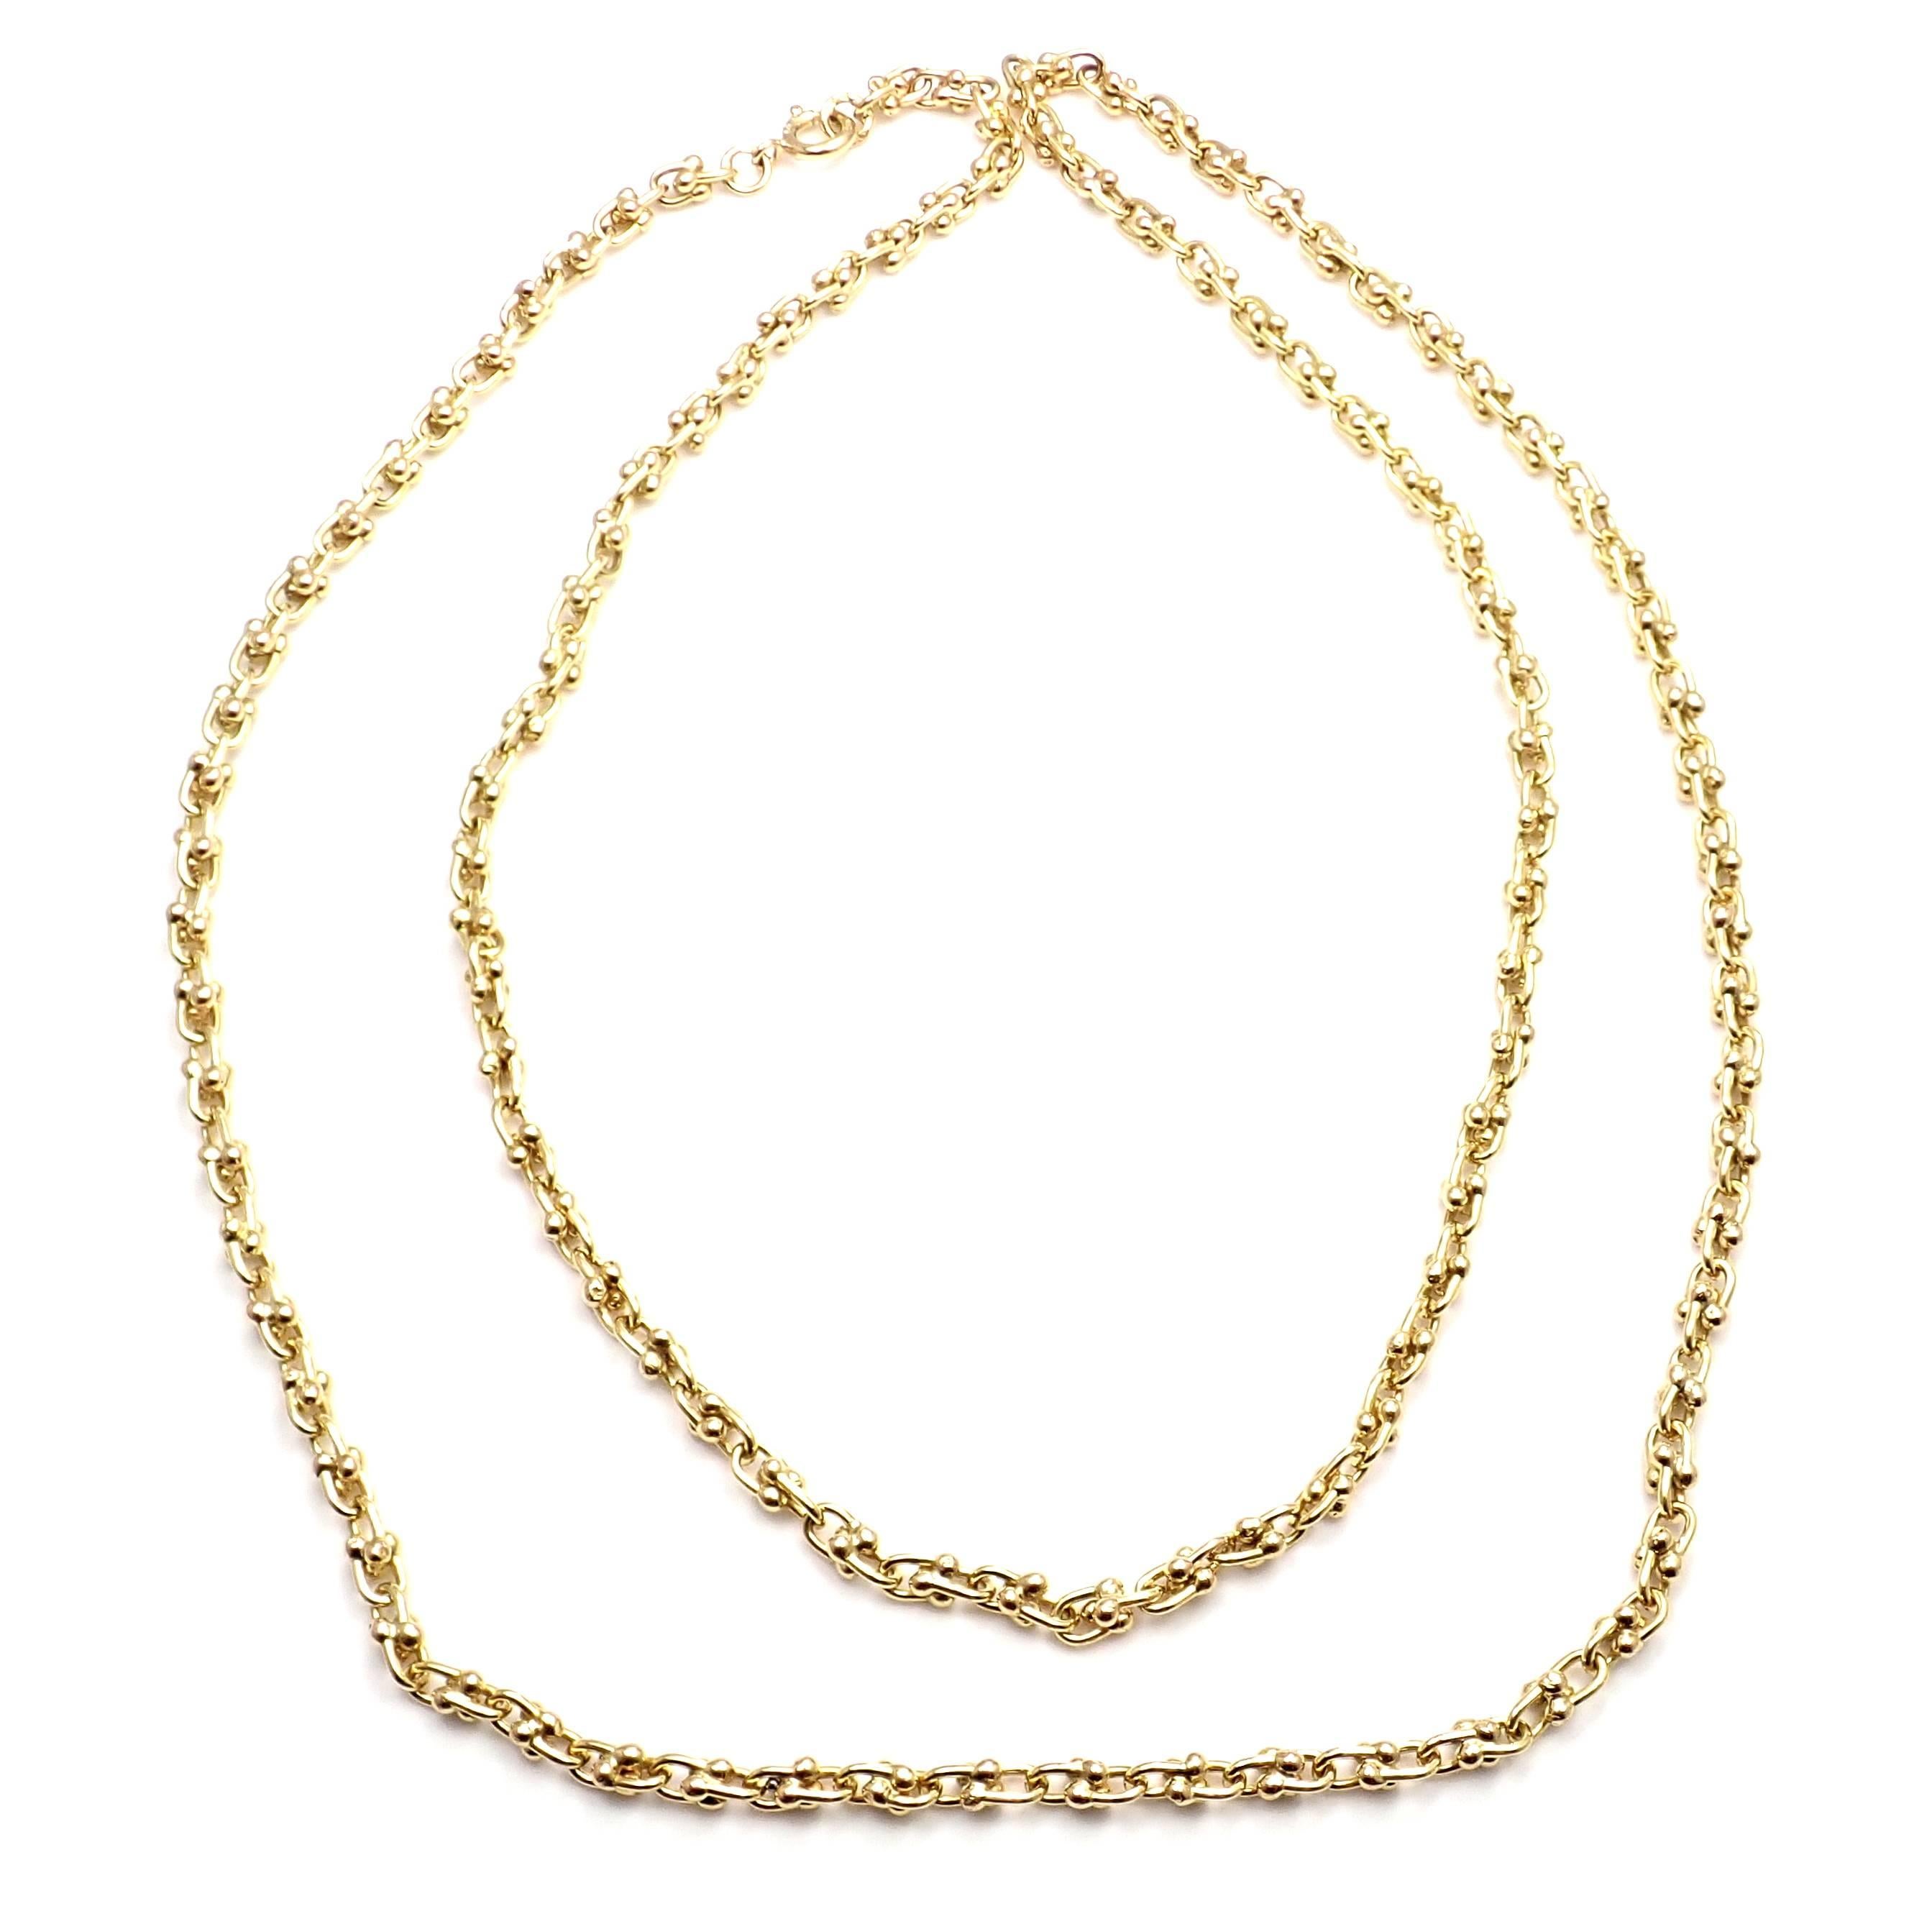 Vintage Van Cleef & Arpels Long Link Yellow Gold Chain Necklace 2